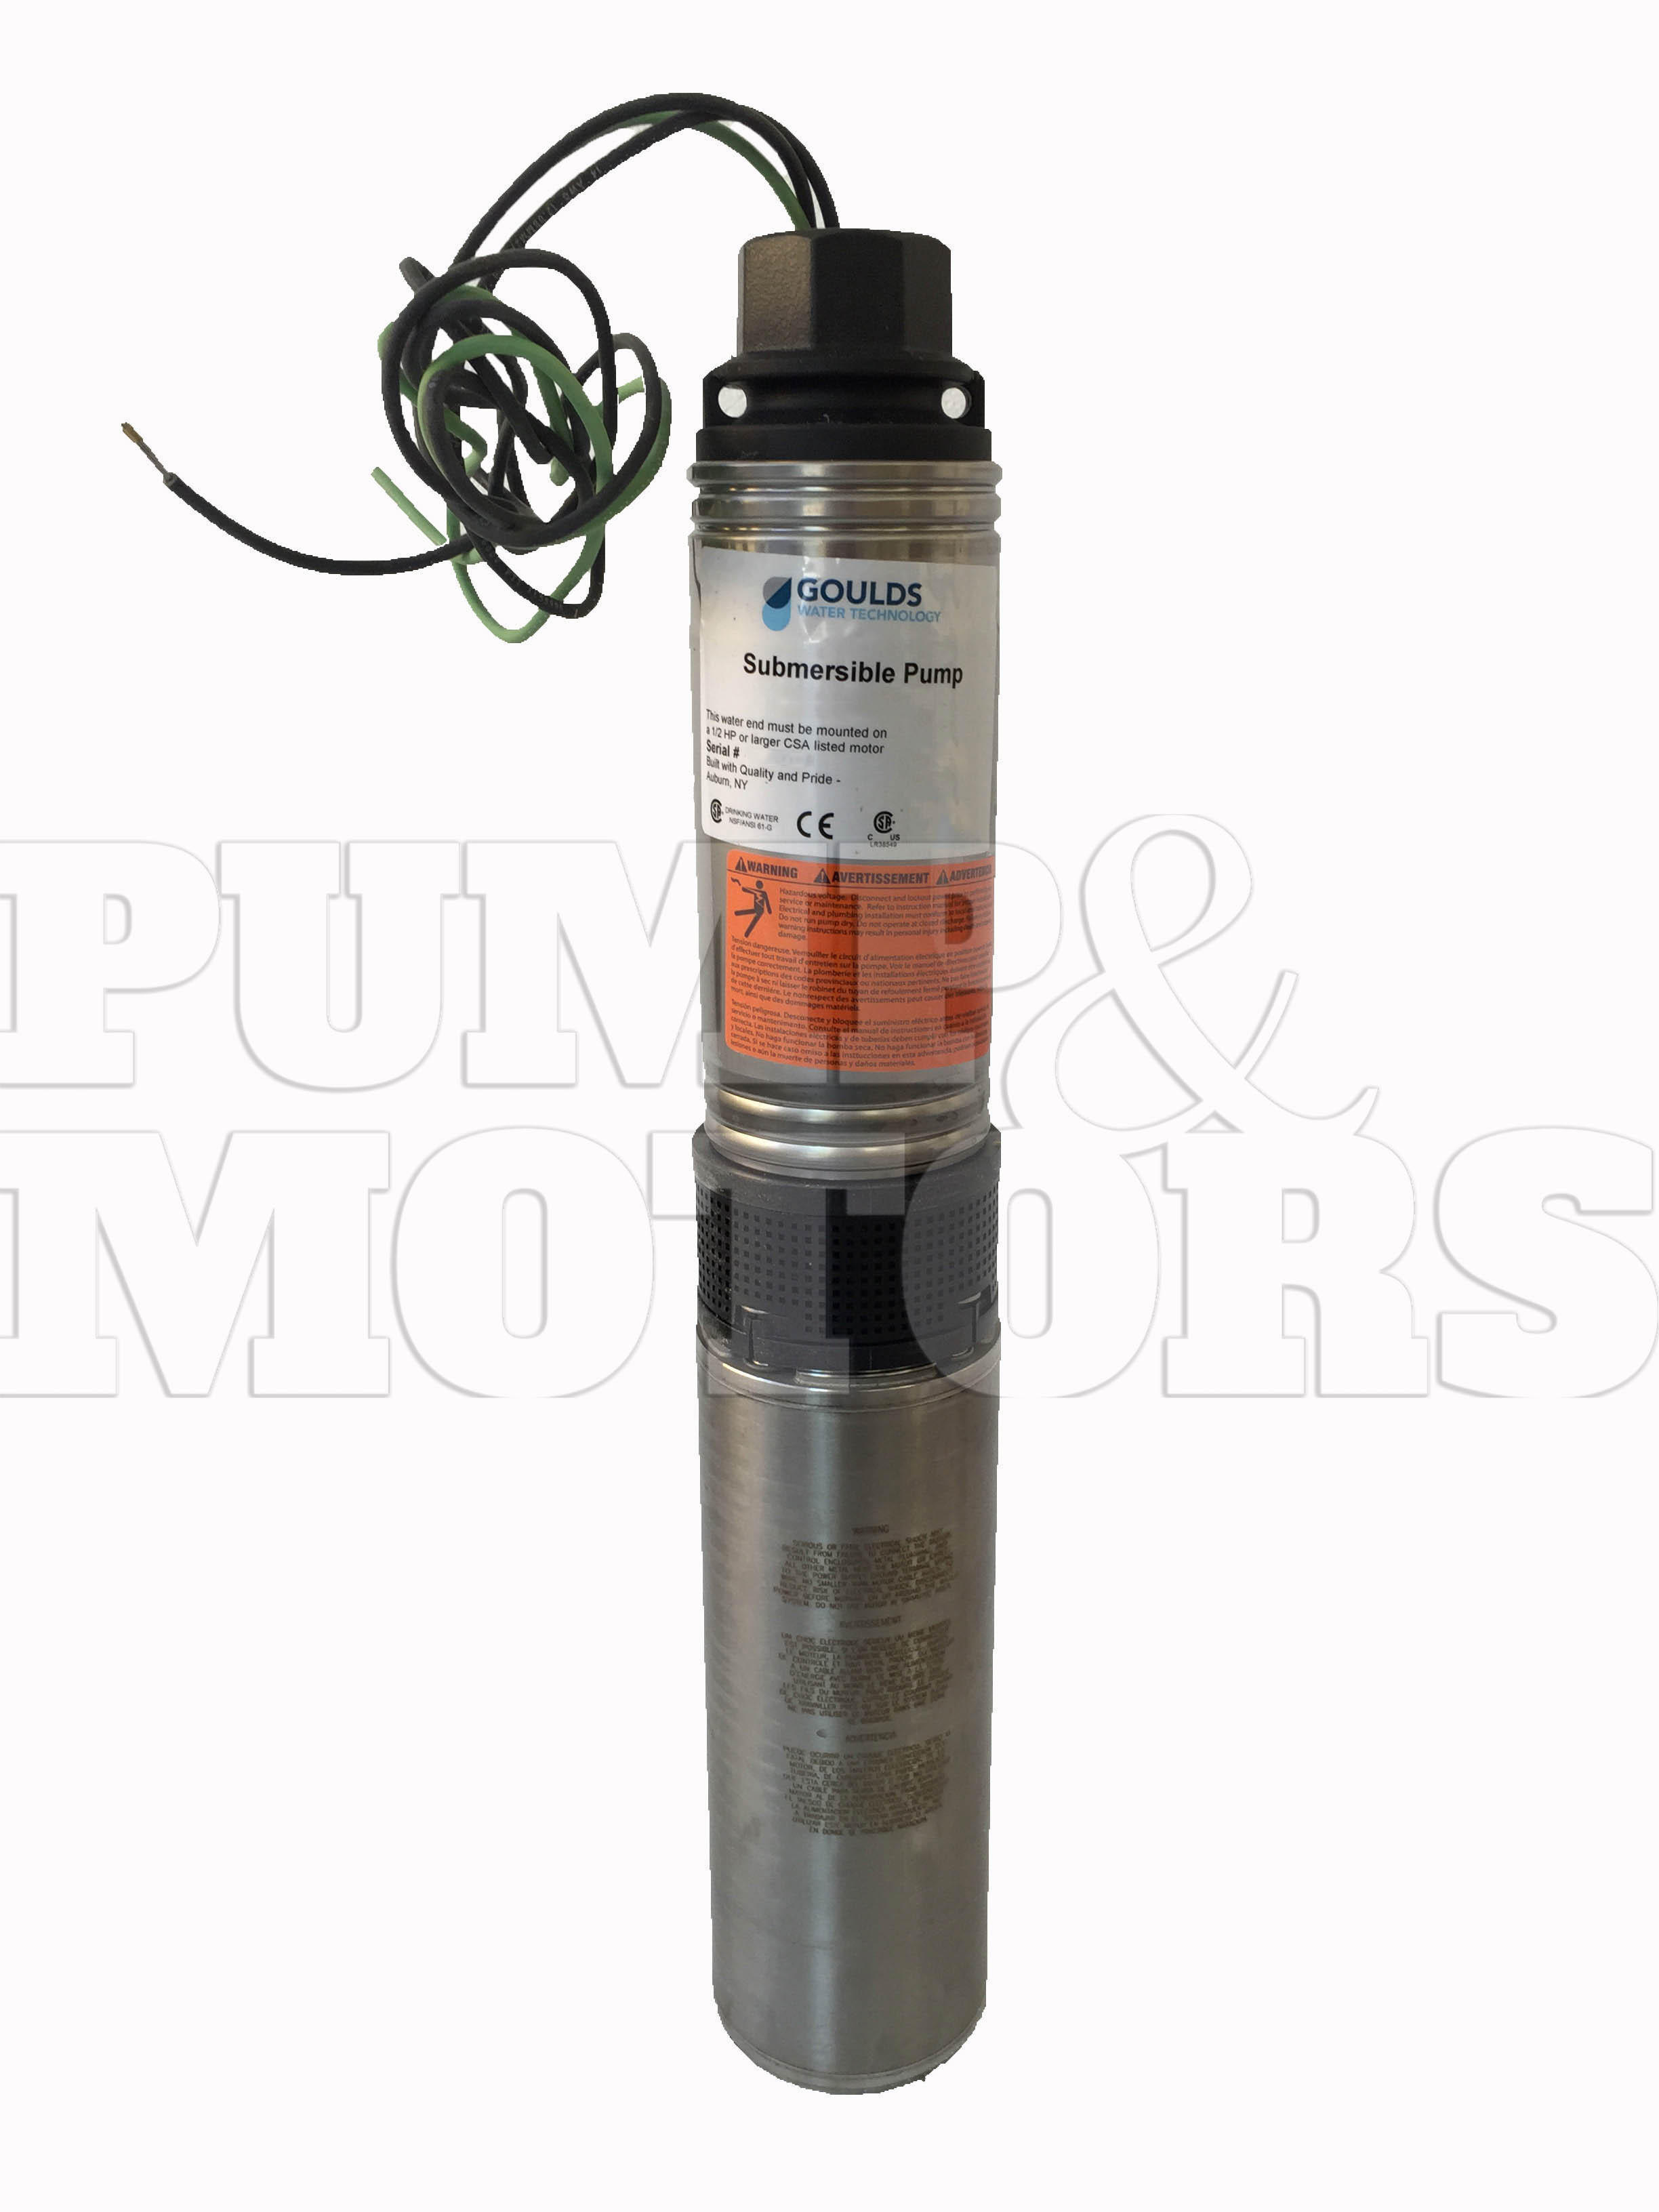 Goulds 7HS05421C 1/2HP 115V 4" Submersible Water Well Pump 7GPM